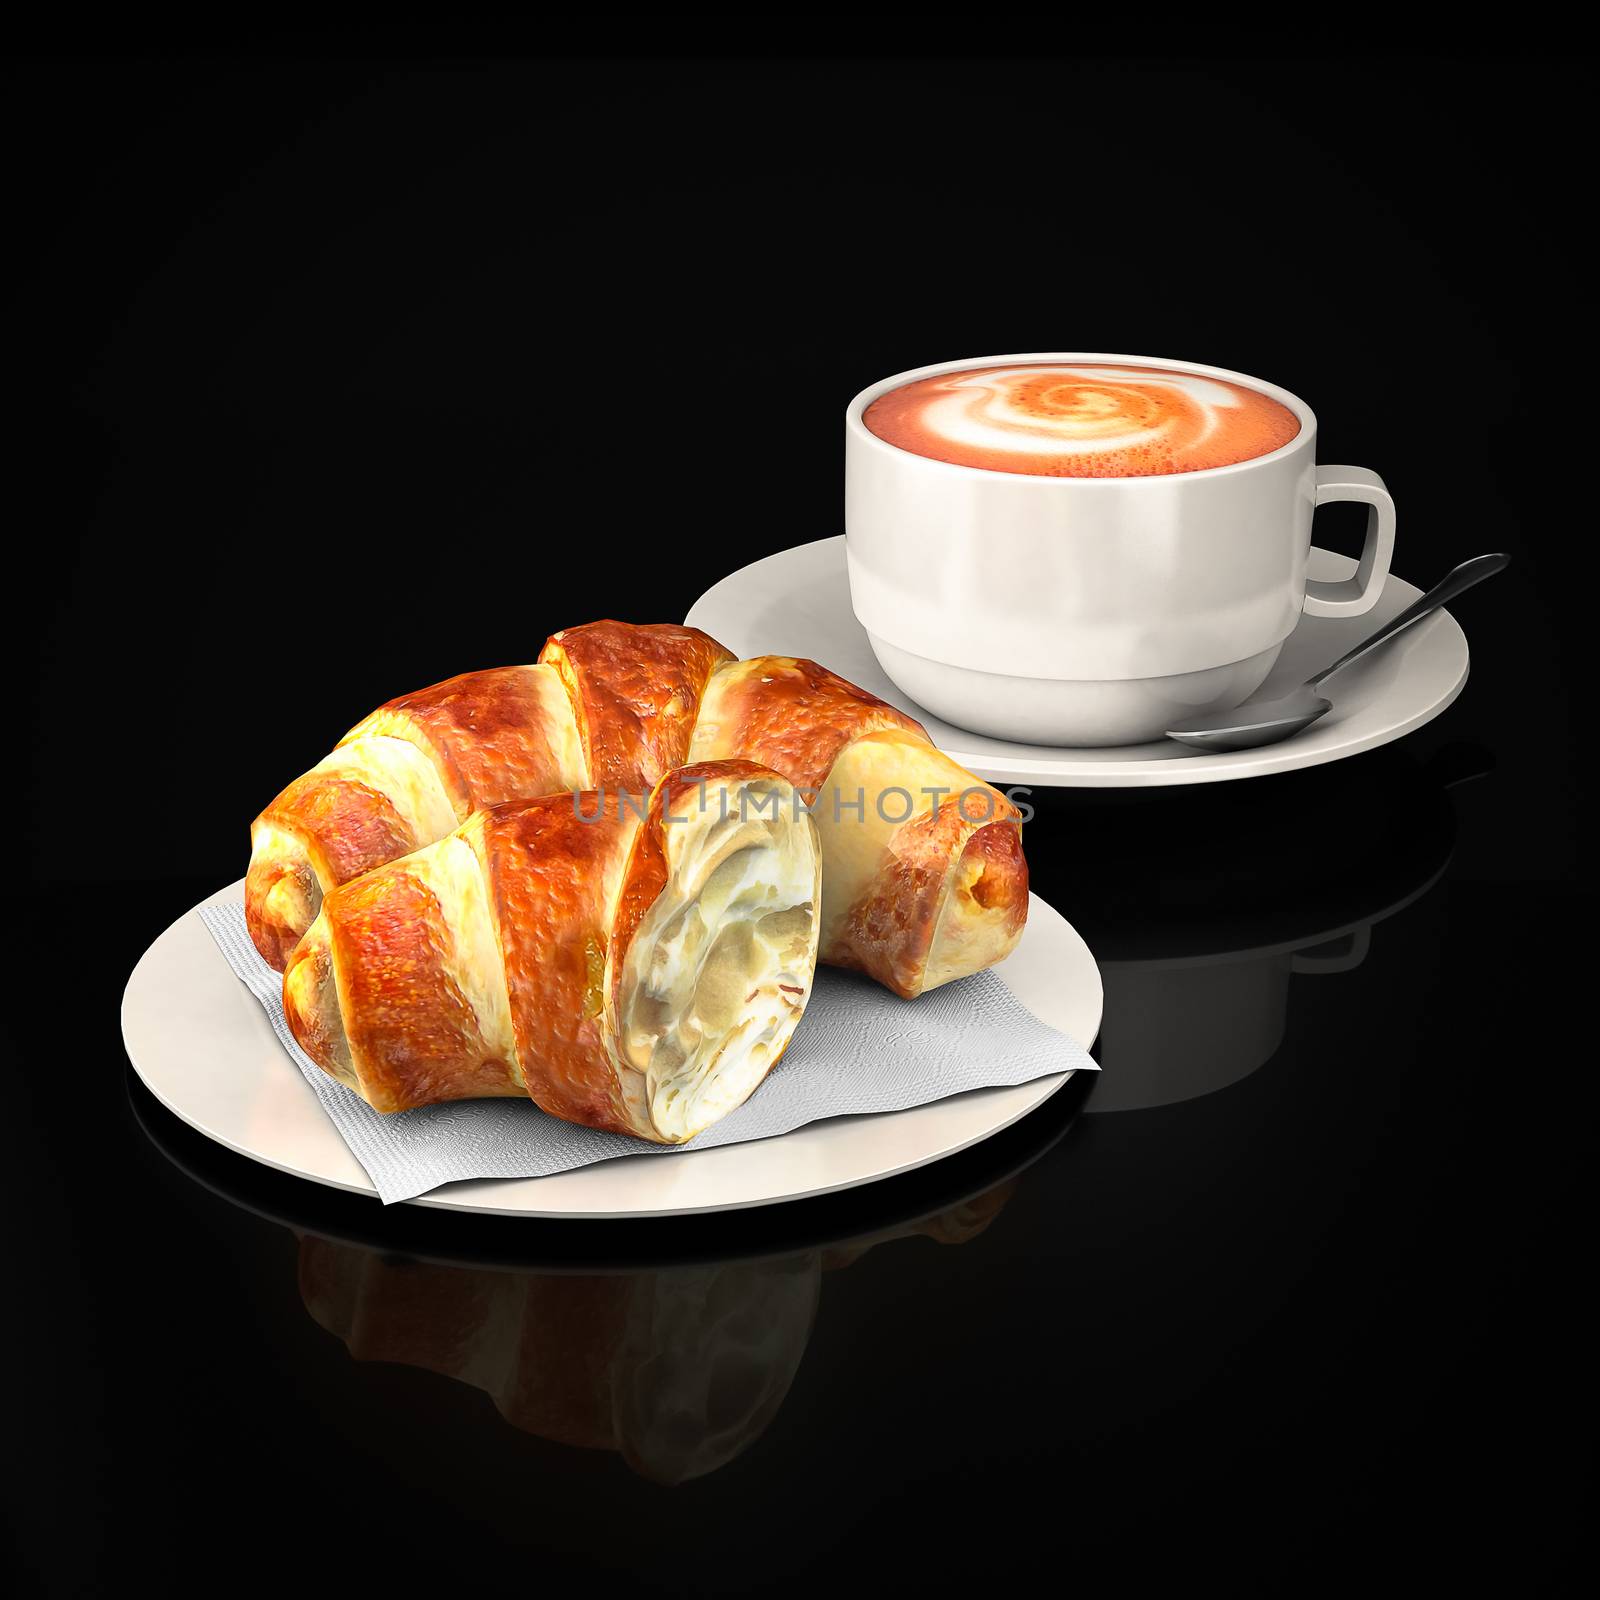 Croissants and coffee cup by mrgarry